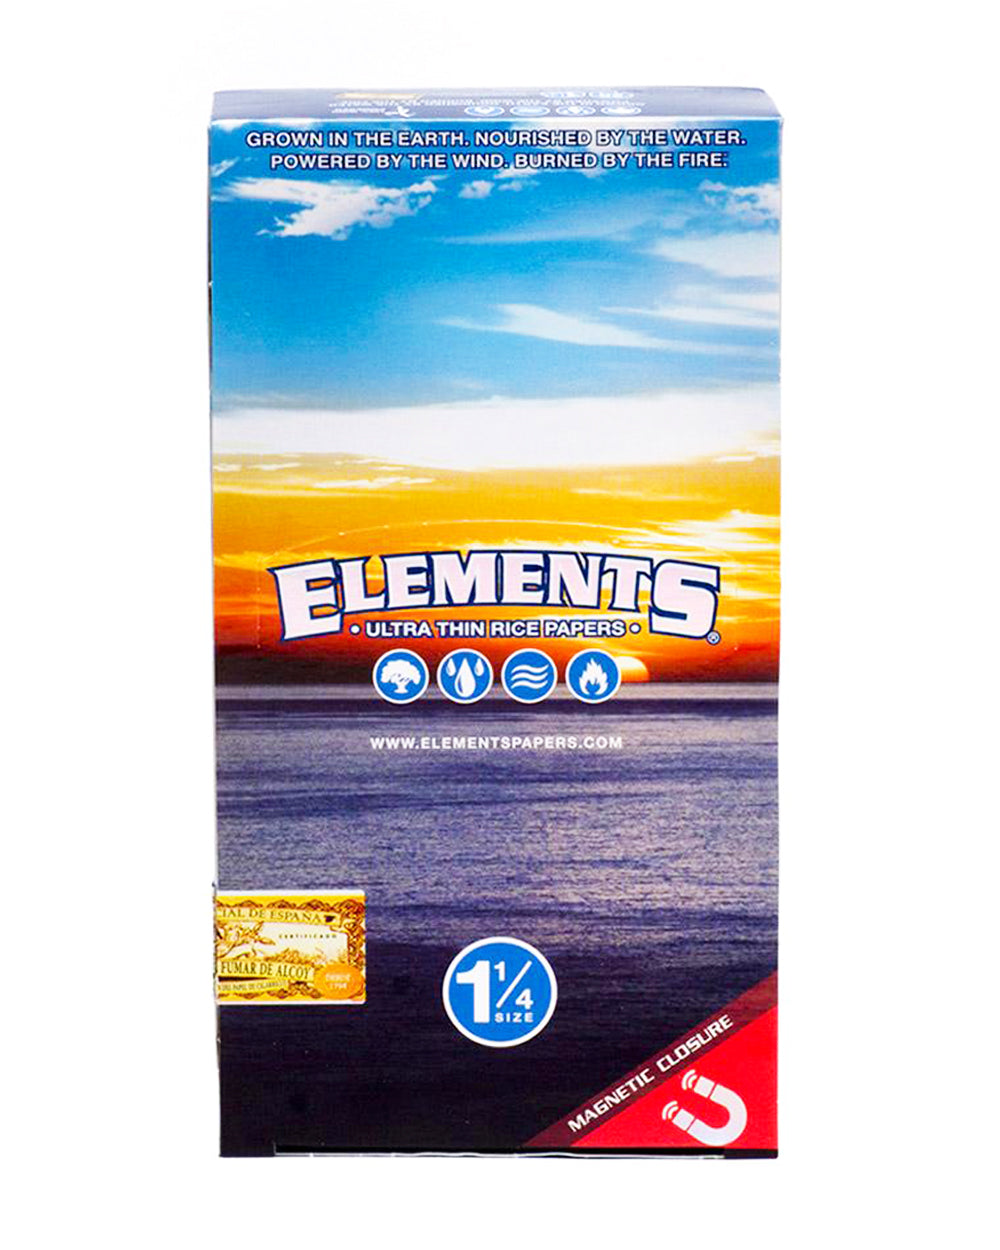 ELEMENTS | 'Retail Display' 1 1/4 Size Ultra Thin Rolling Papers | 83mm - Rice Paper - 25 Count - 2